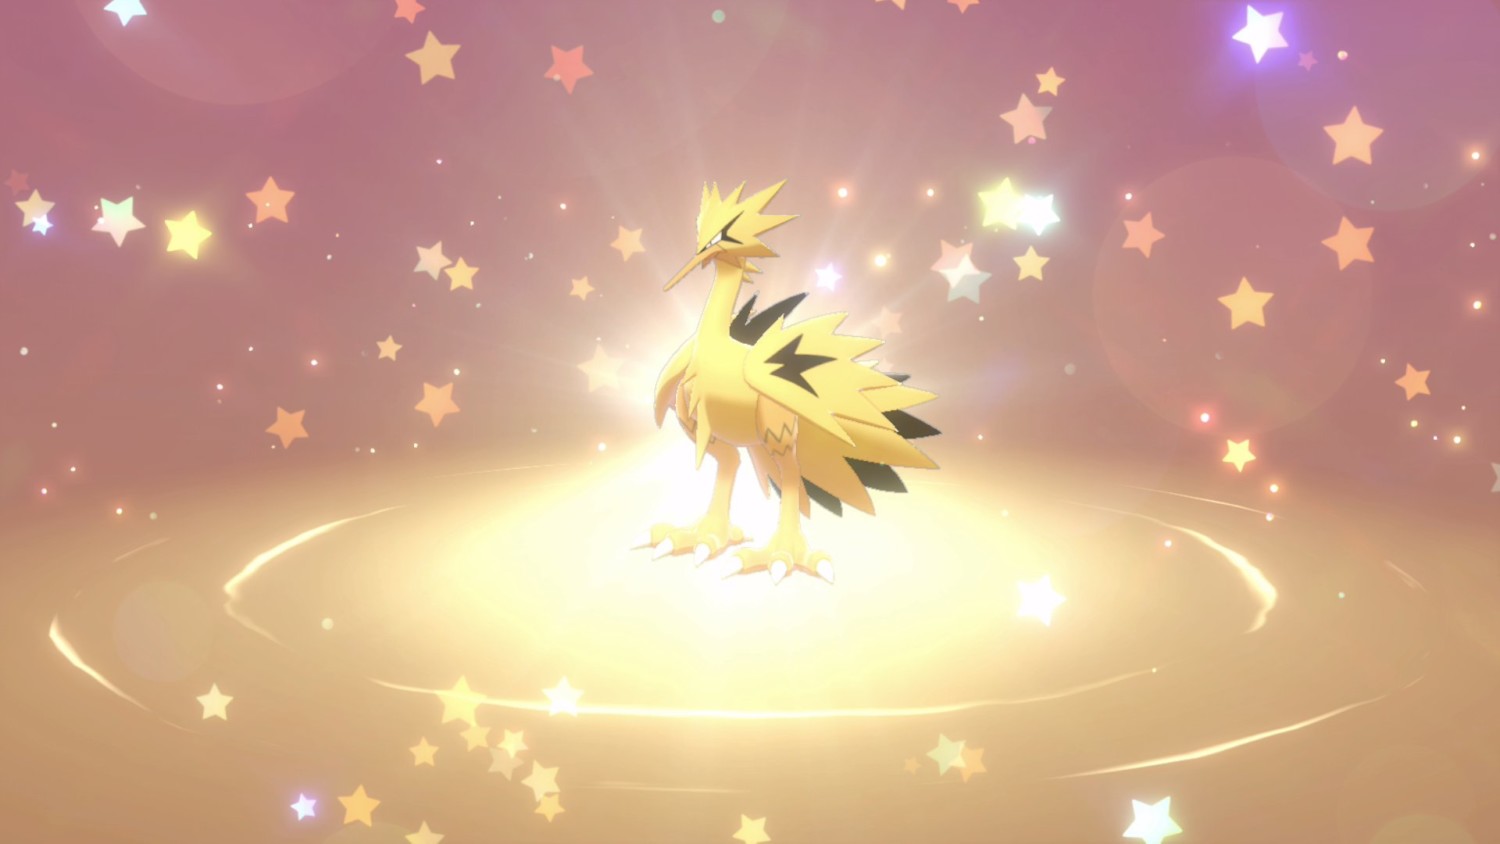 Shiny Galarian Articuno is available - Pokémon Global News